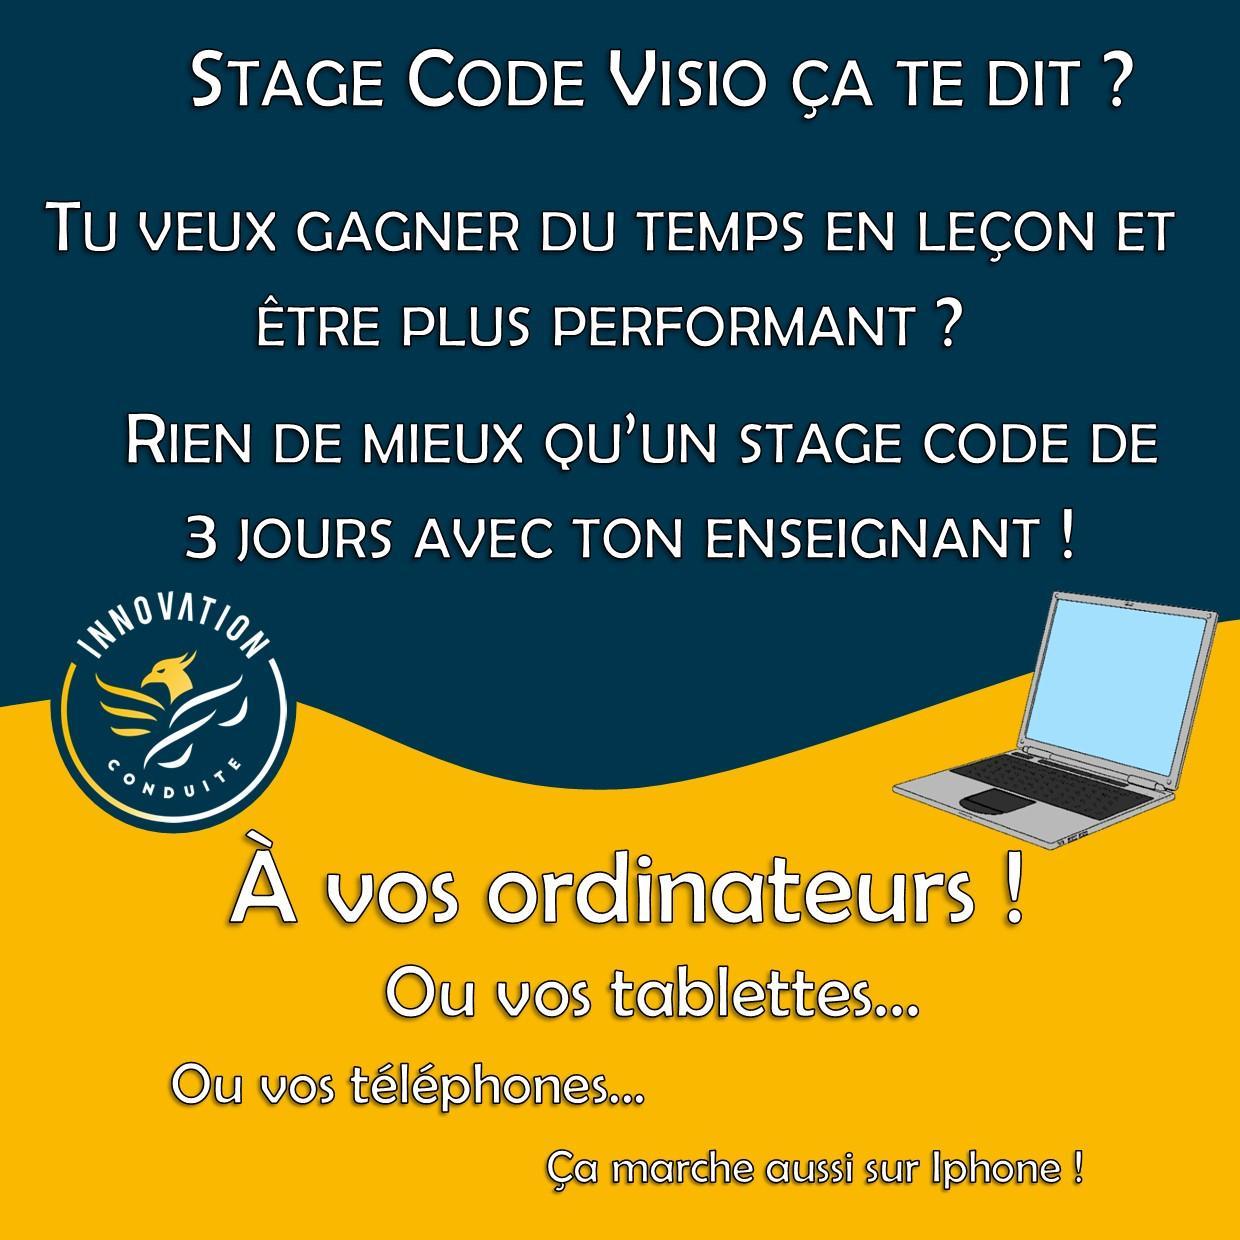 Le stage code